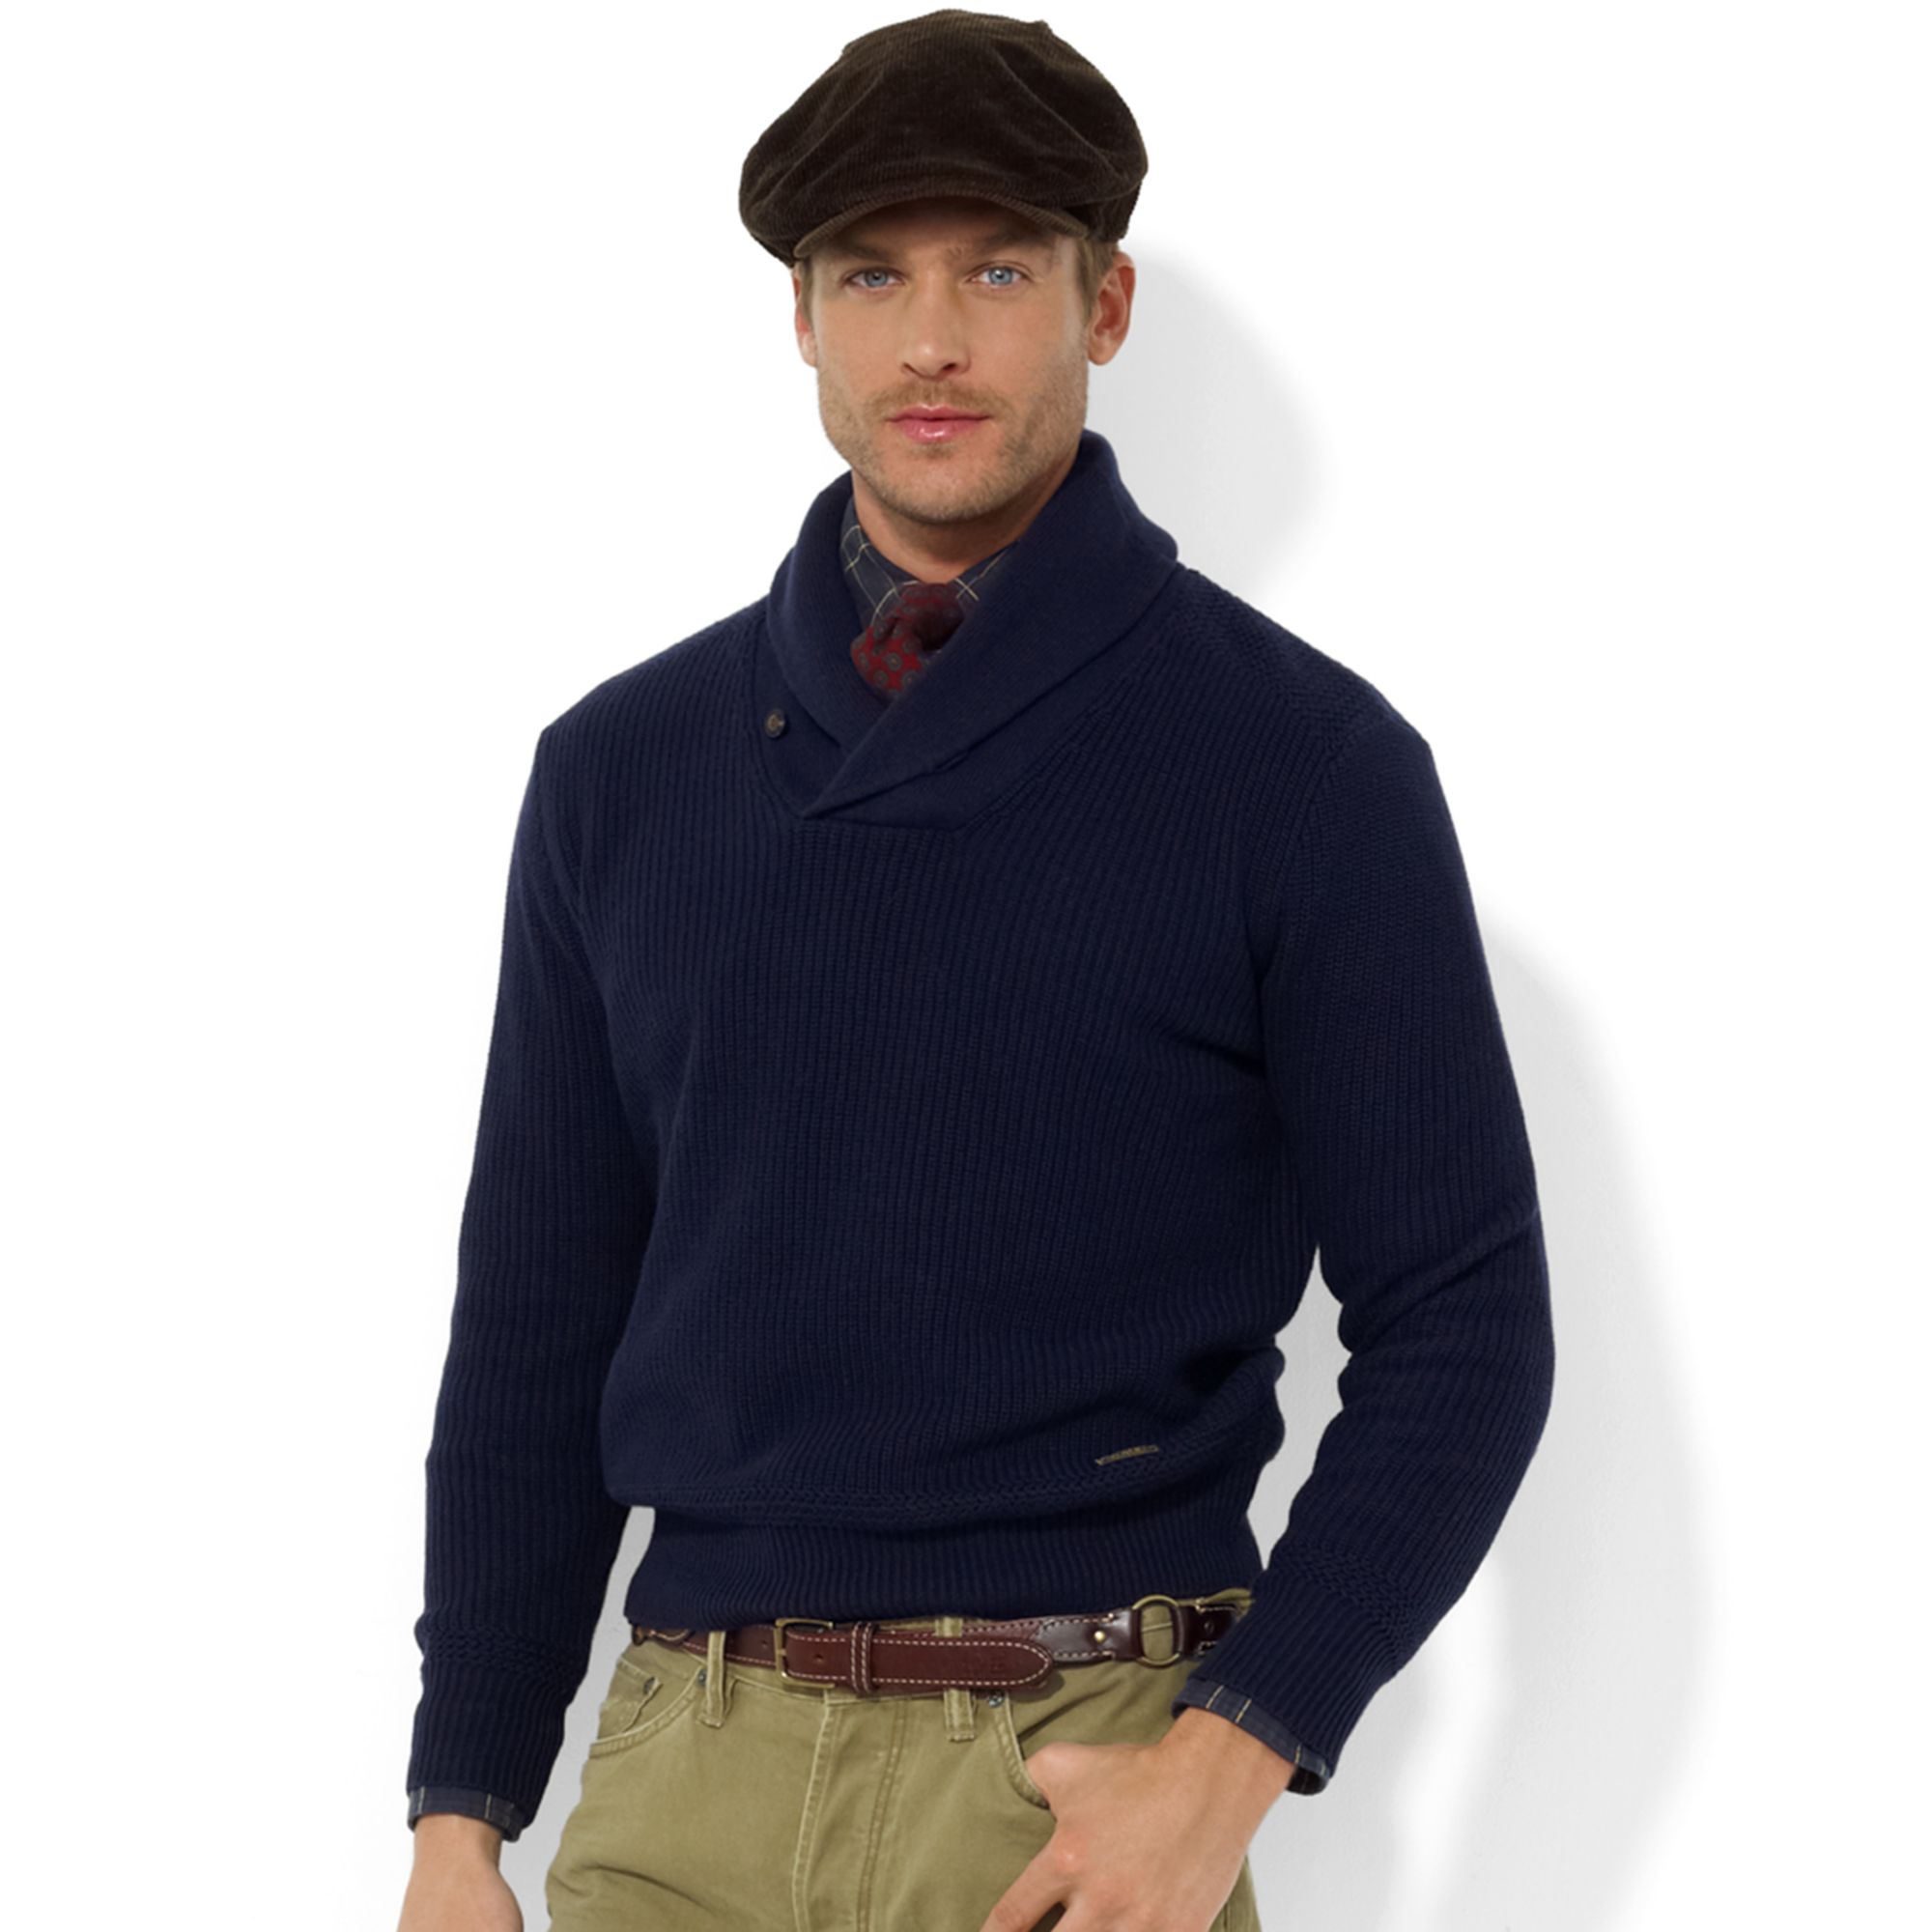 Lyst - Polo ralph lauren Shawl Collar Cotton Sweater in Blue for Men